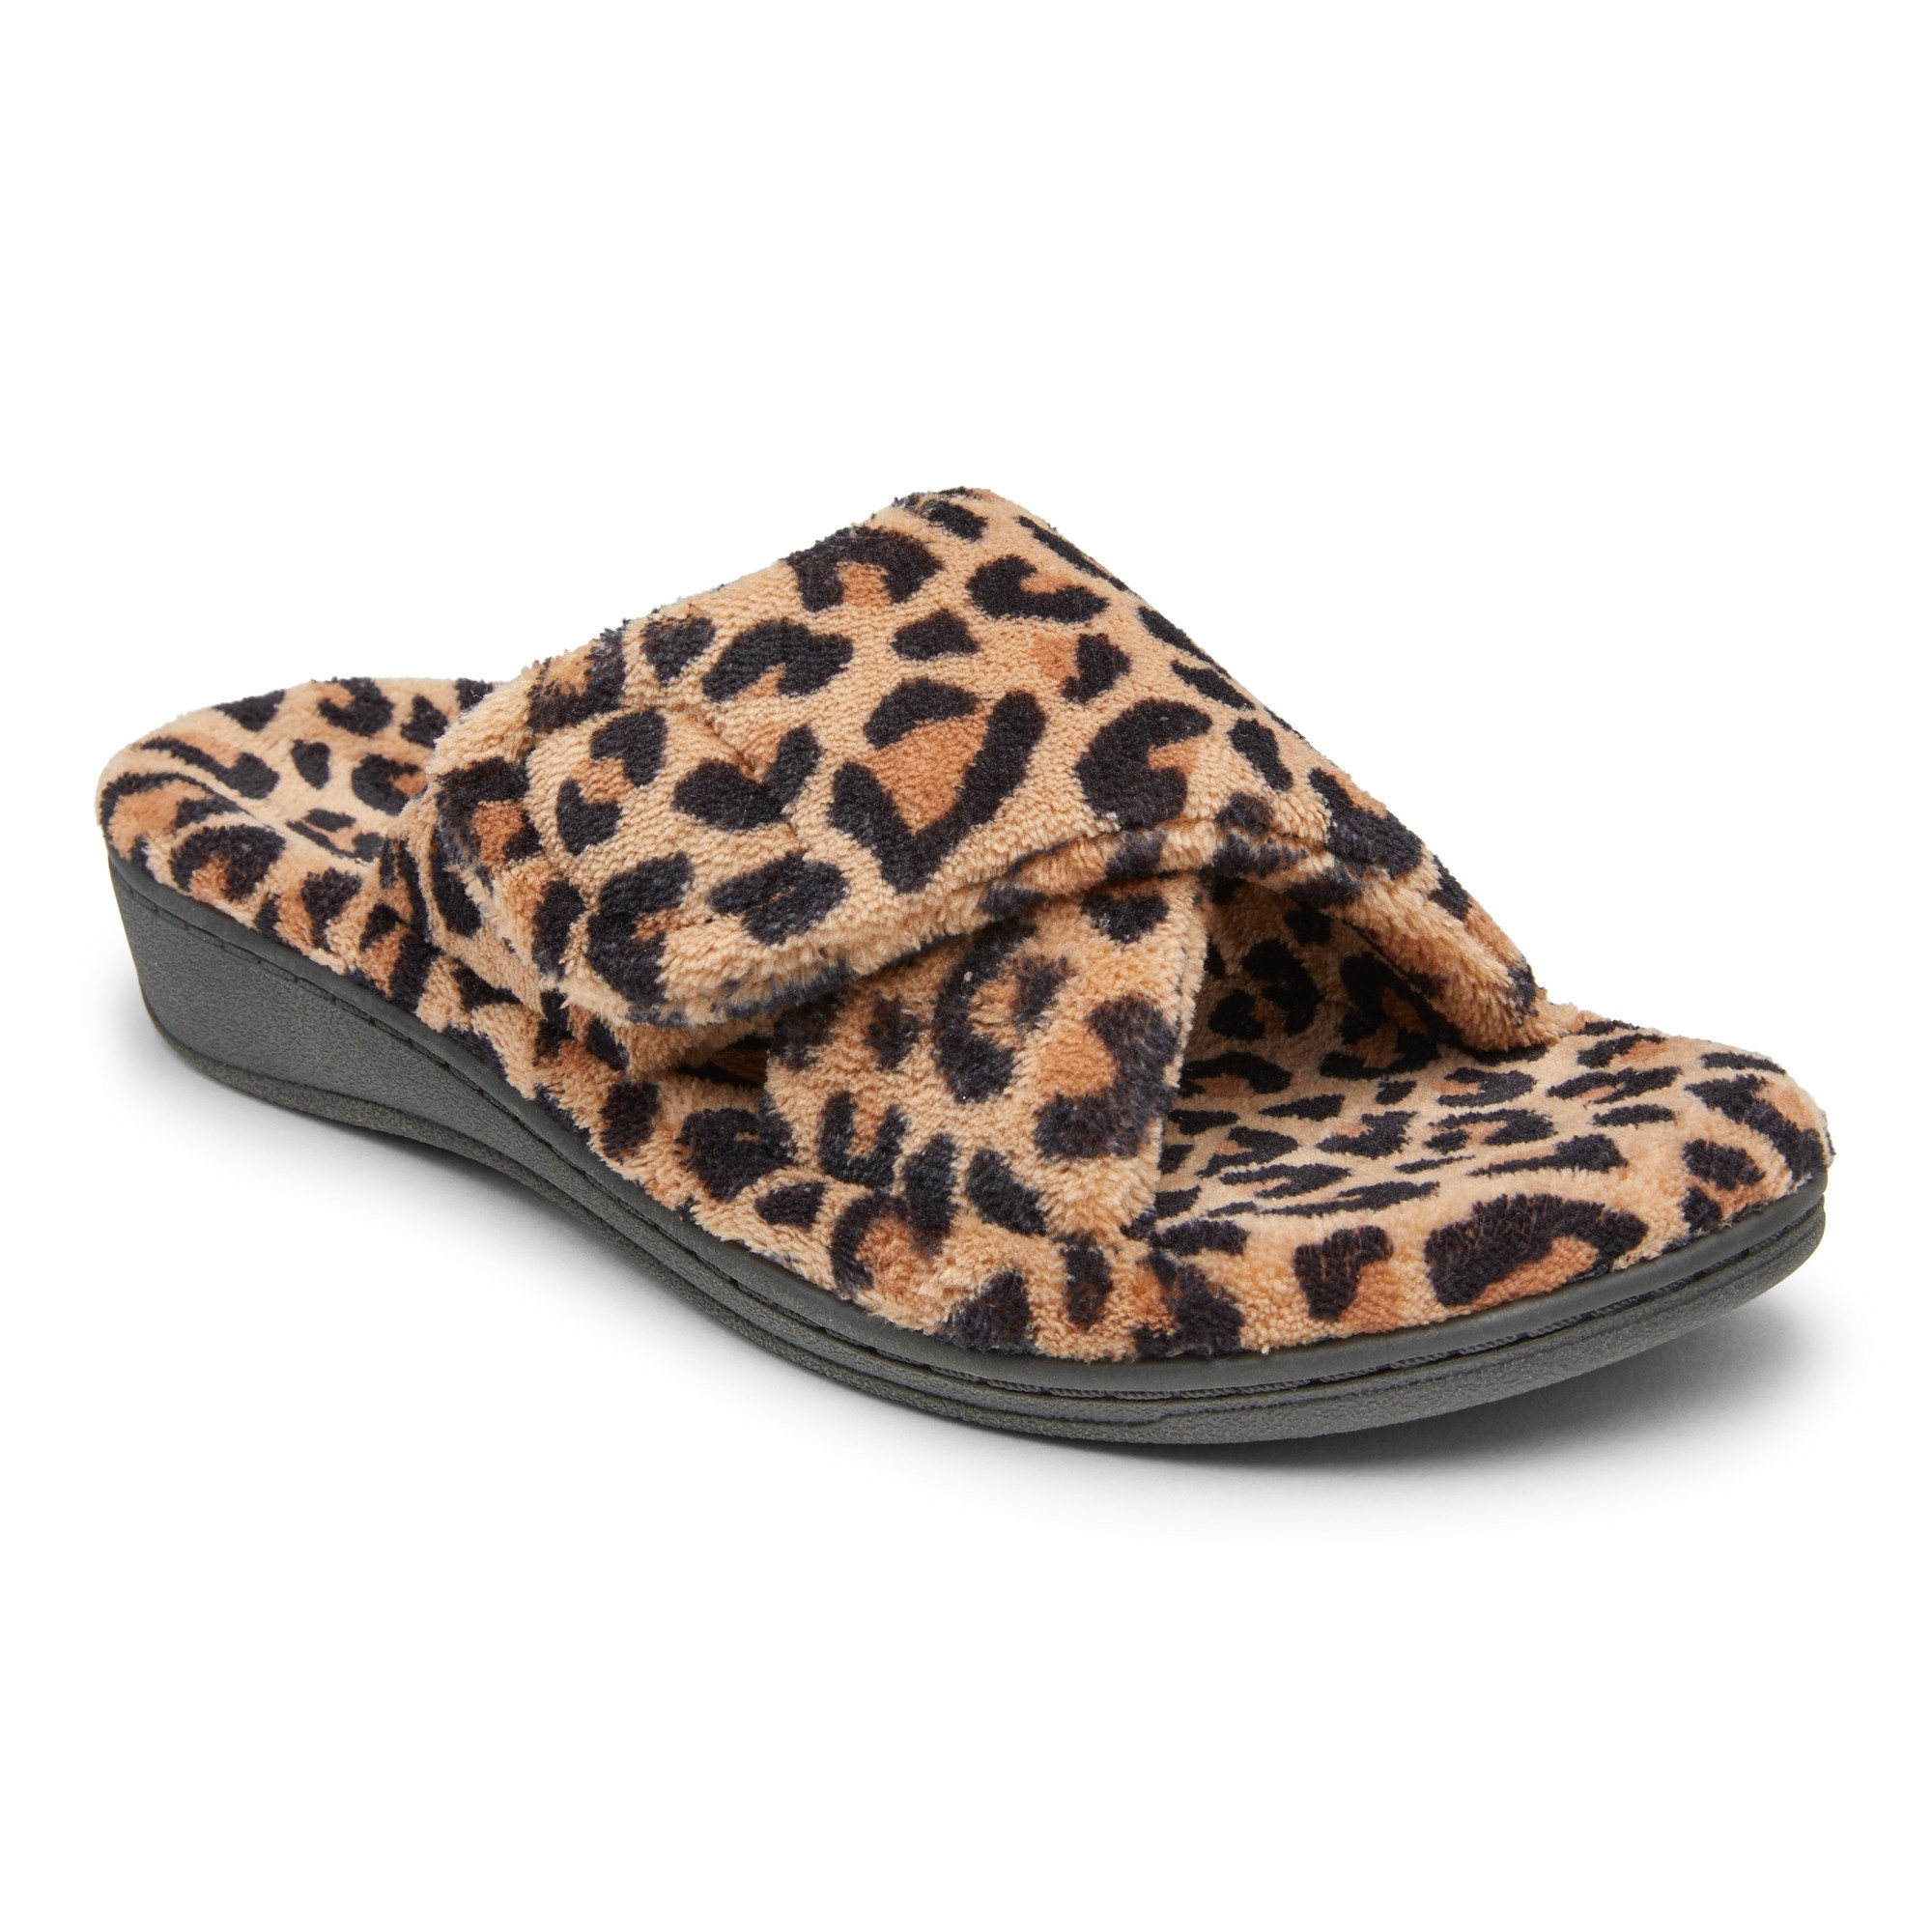 vionic relax slippers sale